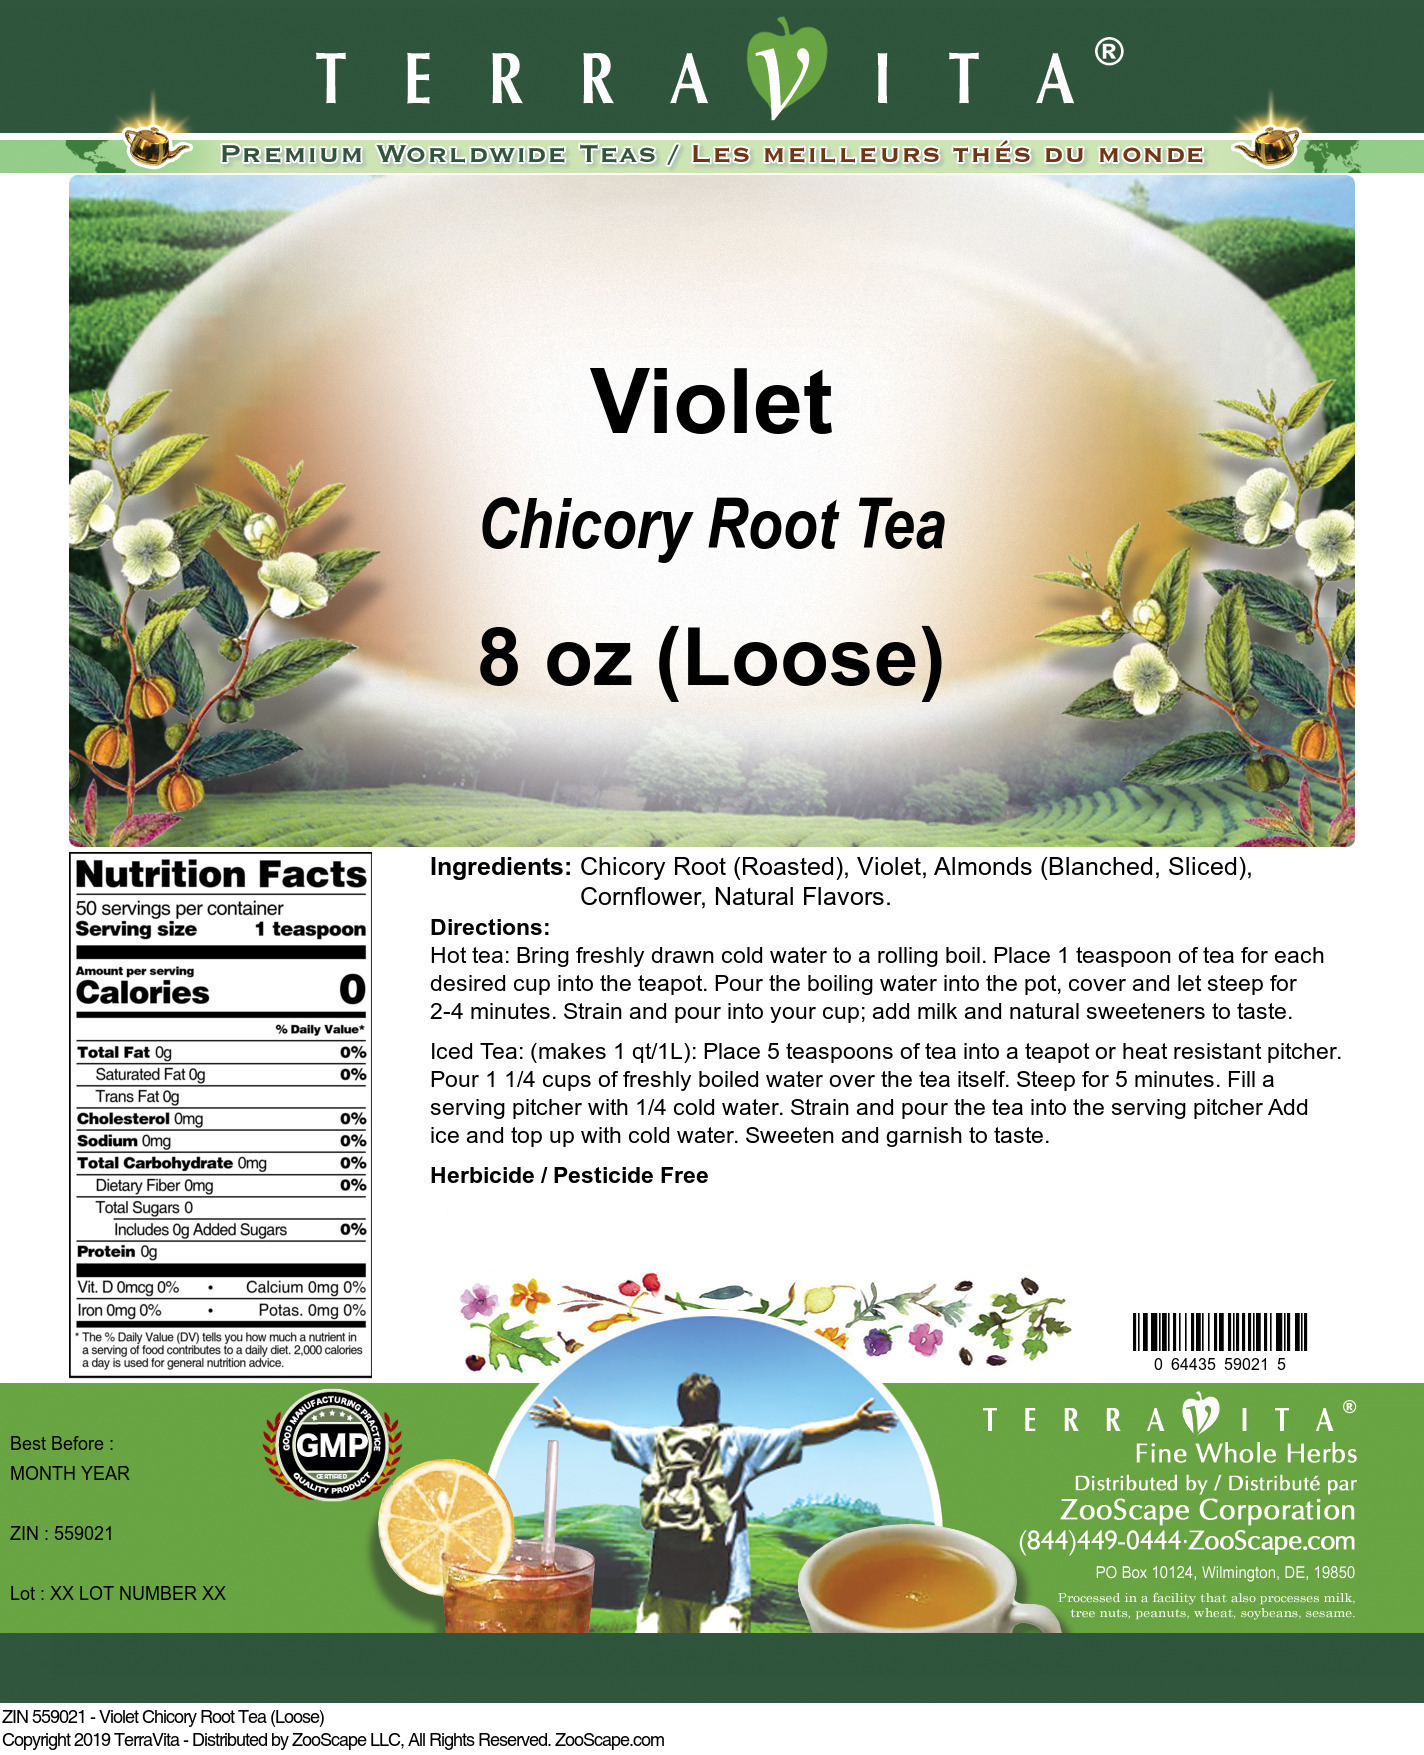 Violet Chicory Root Tea (Loose) - Label